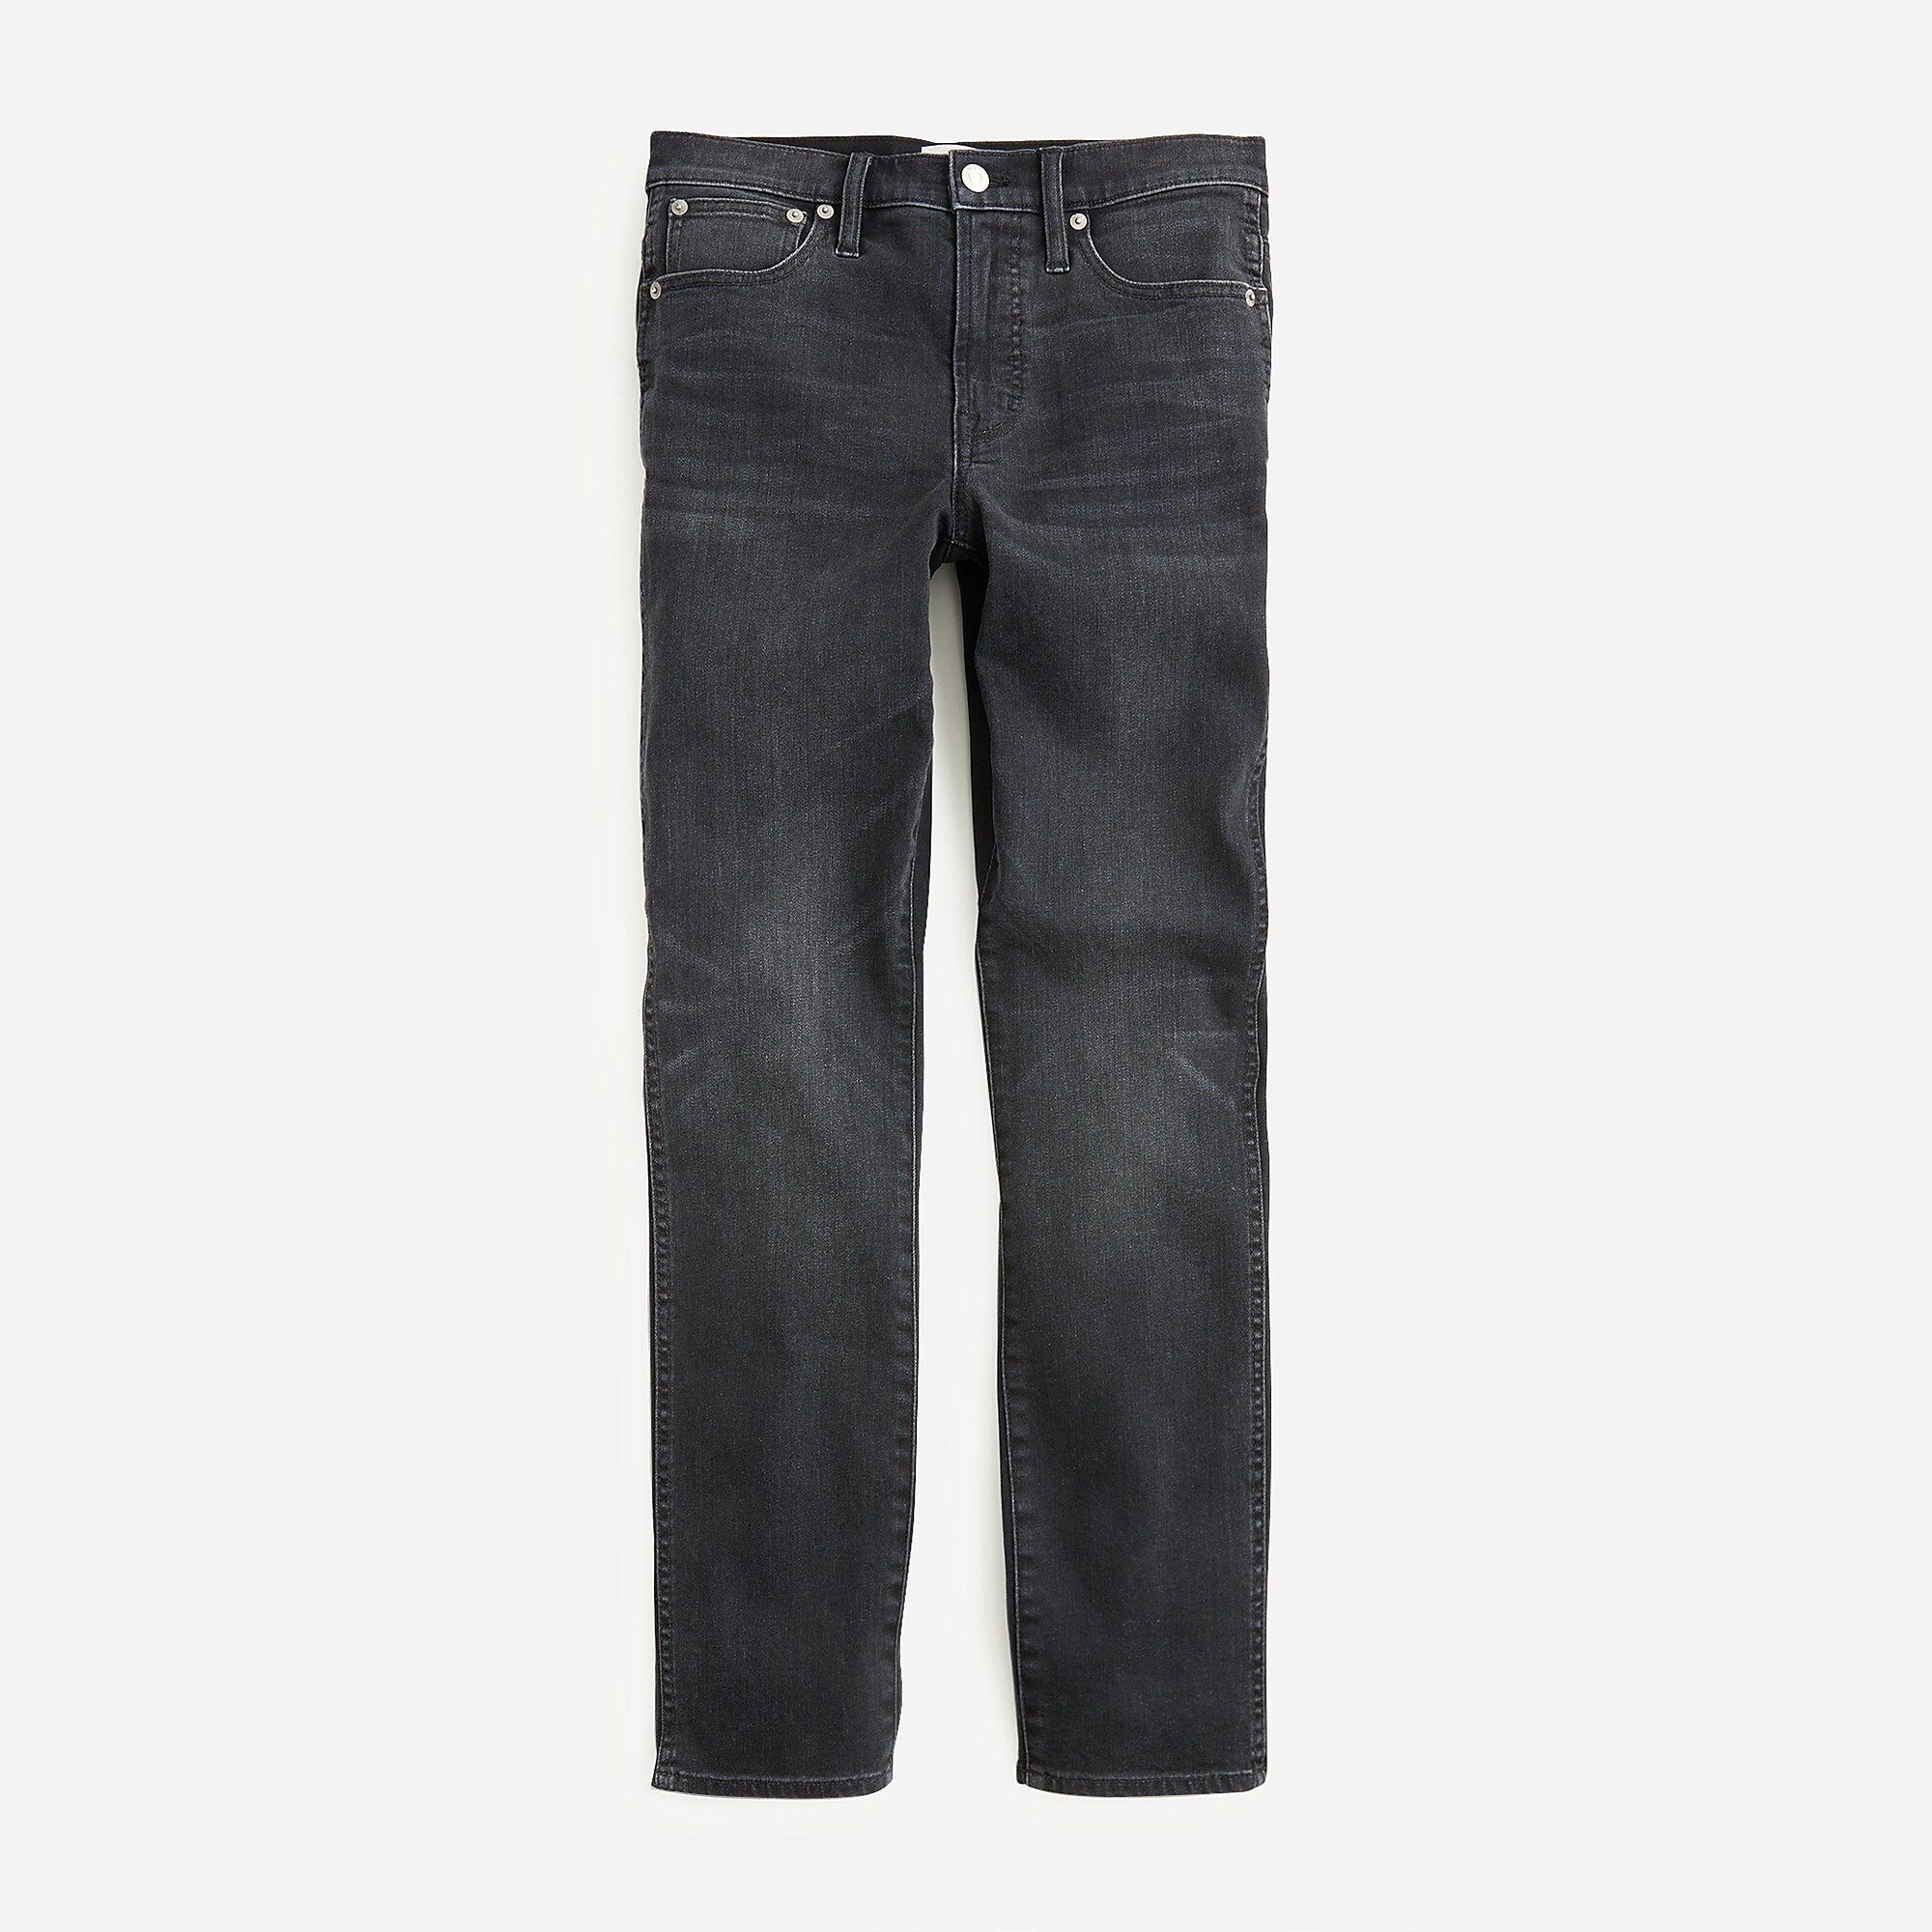 9" Vintage straight jean in charcoal wash | J.Crew US